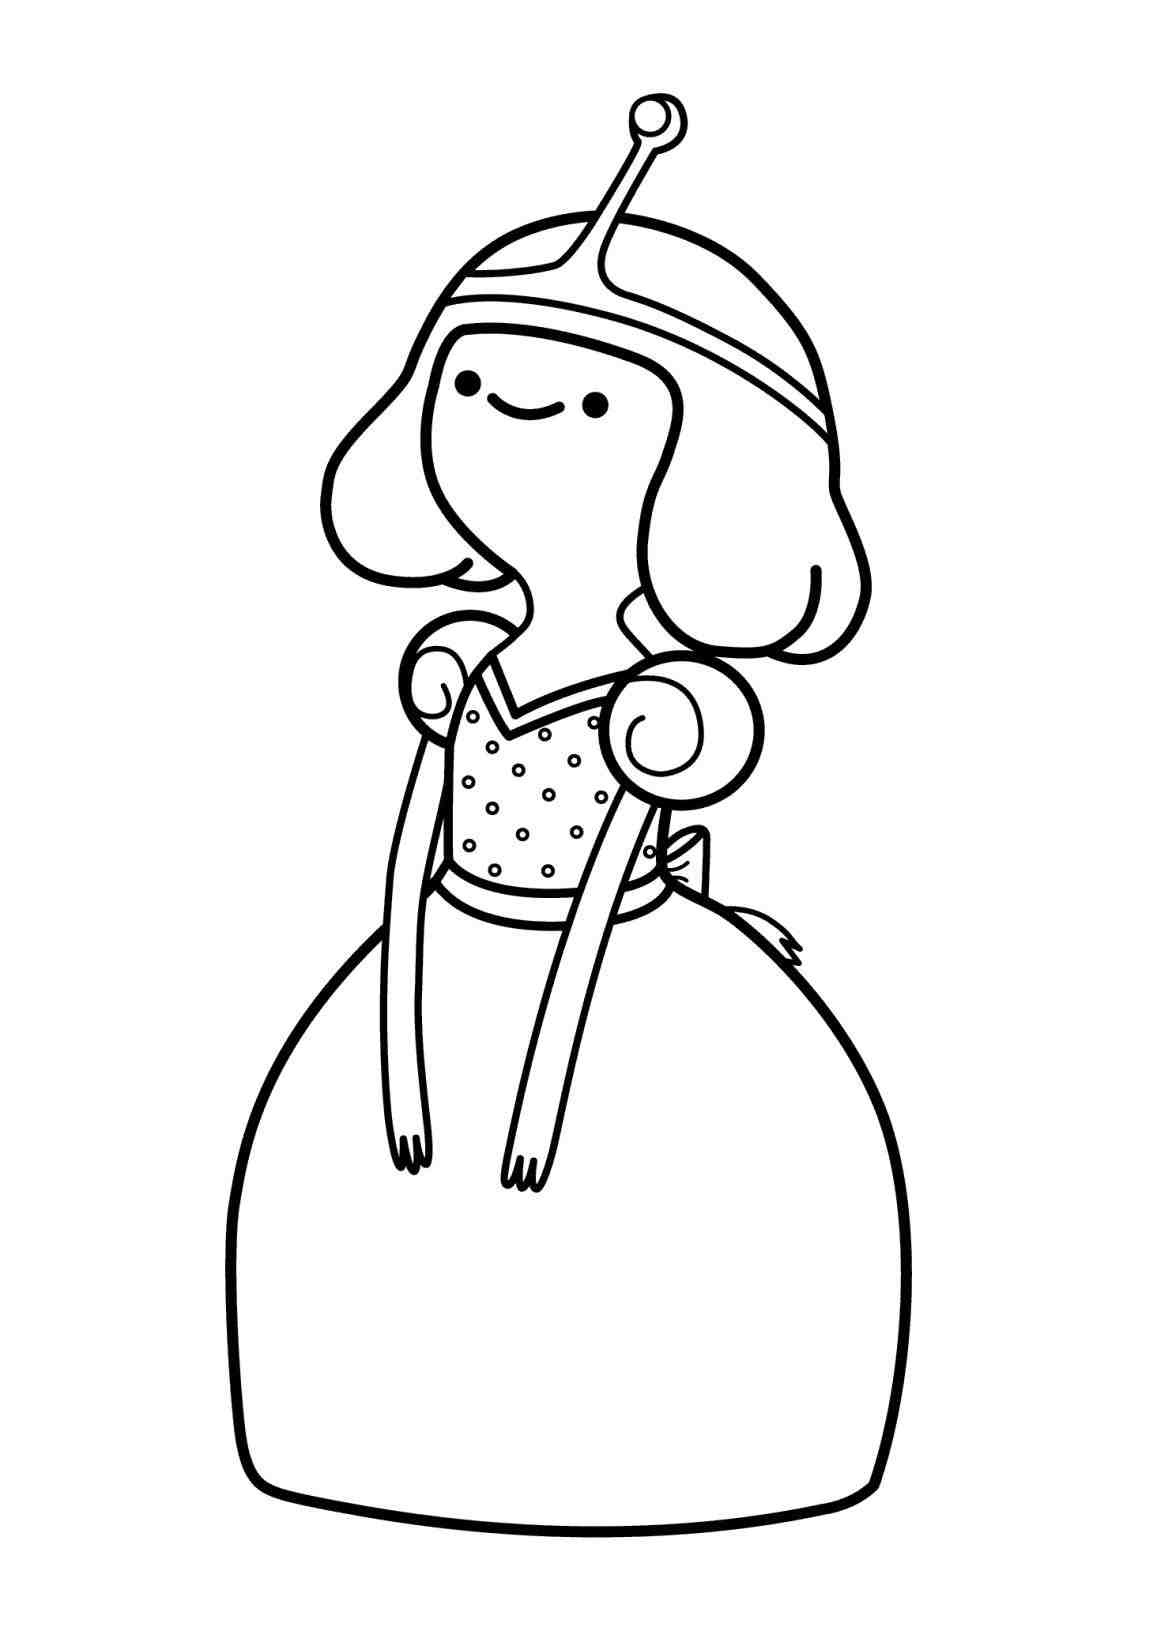 Lady Rainicorn Coloring Pages_ at Free printable